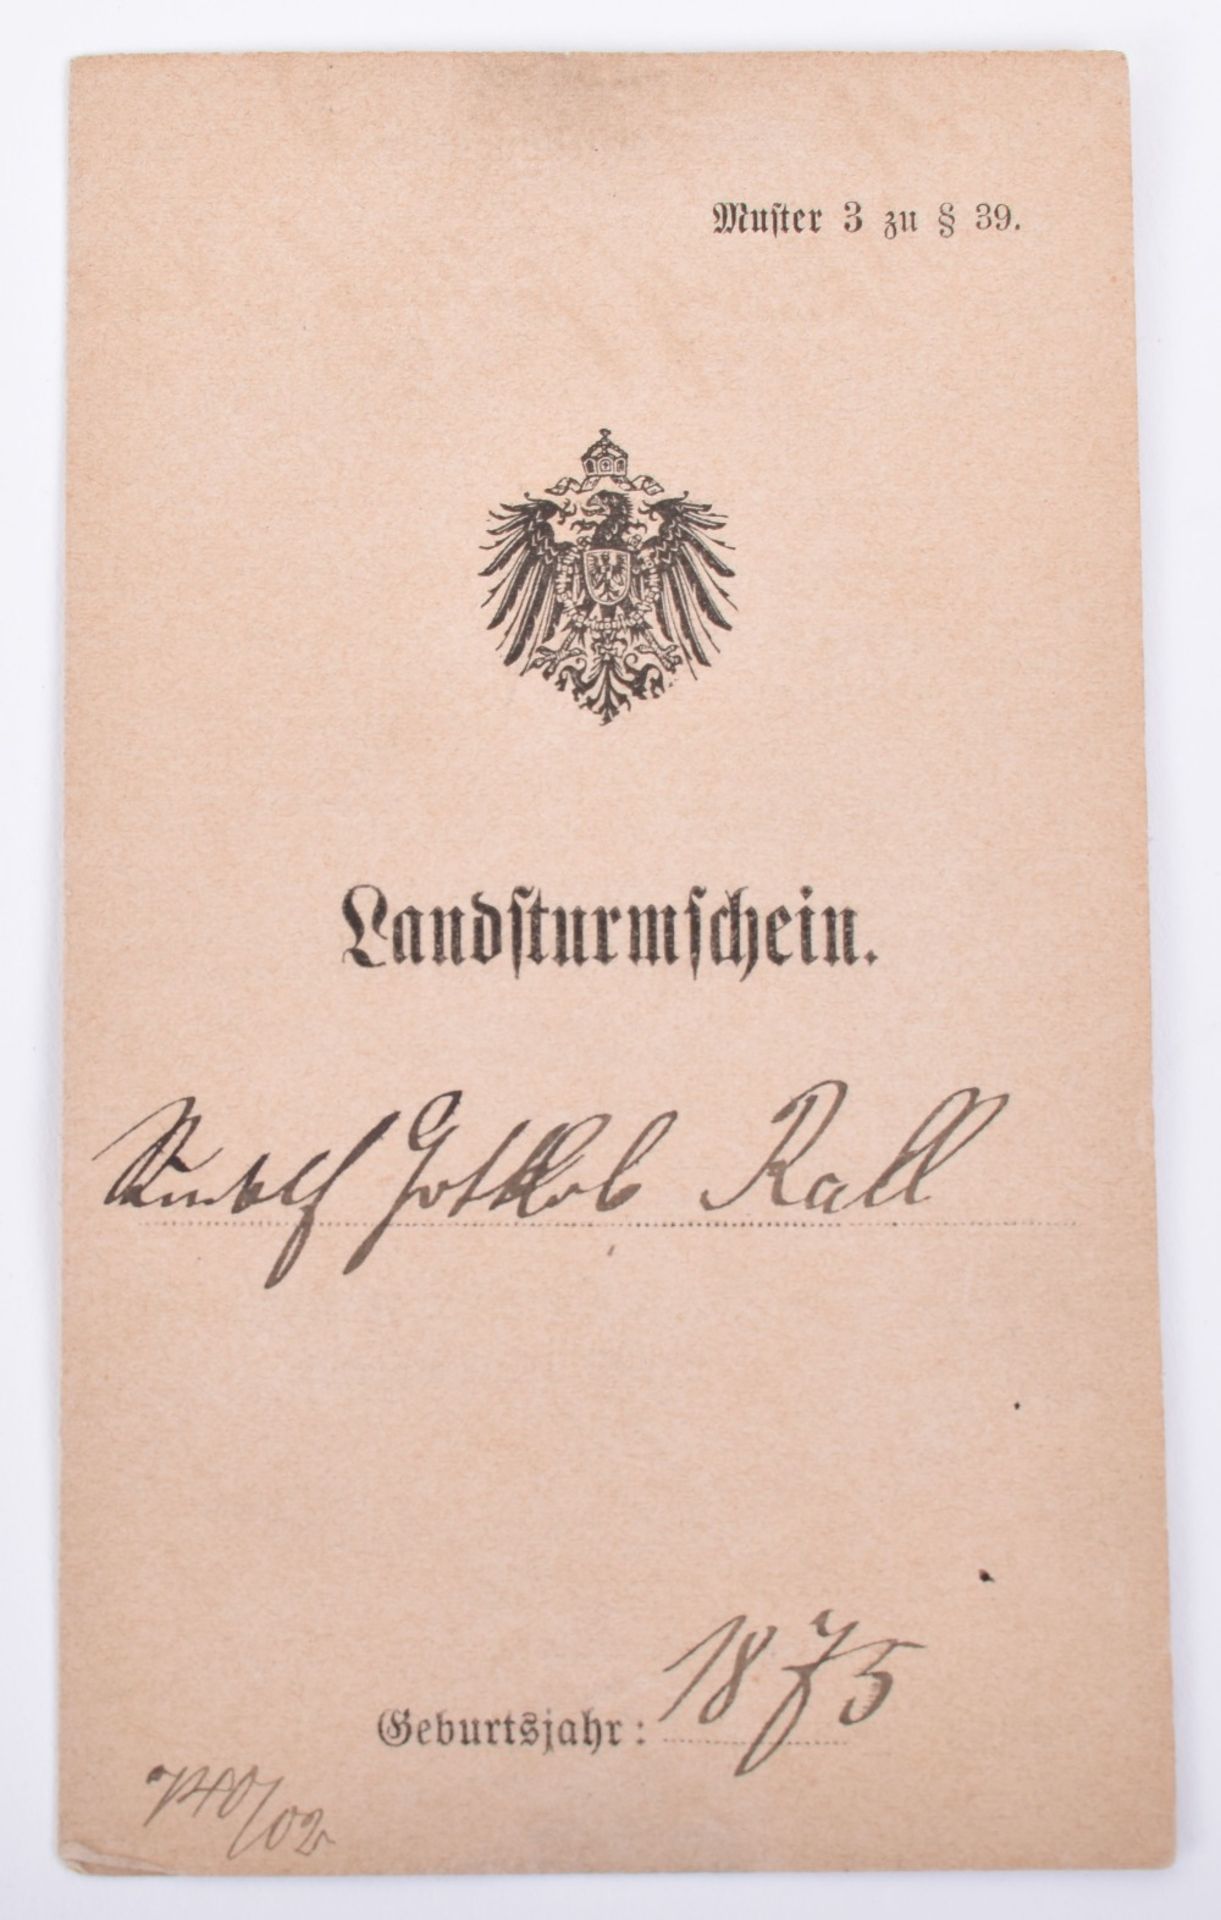 WW1 Soldbuch and Militarpass of Gunther Rall’s Father Rudolf Gottlob Rall - Image 4 of 7